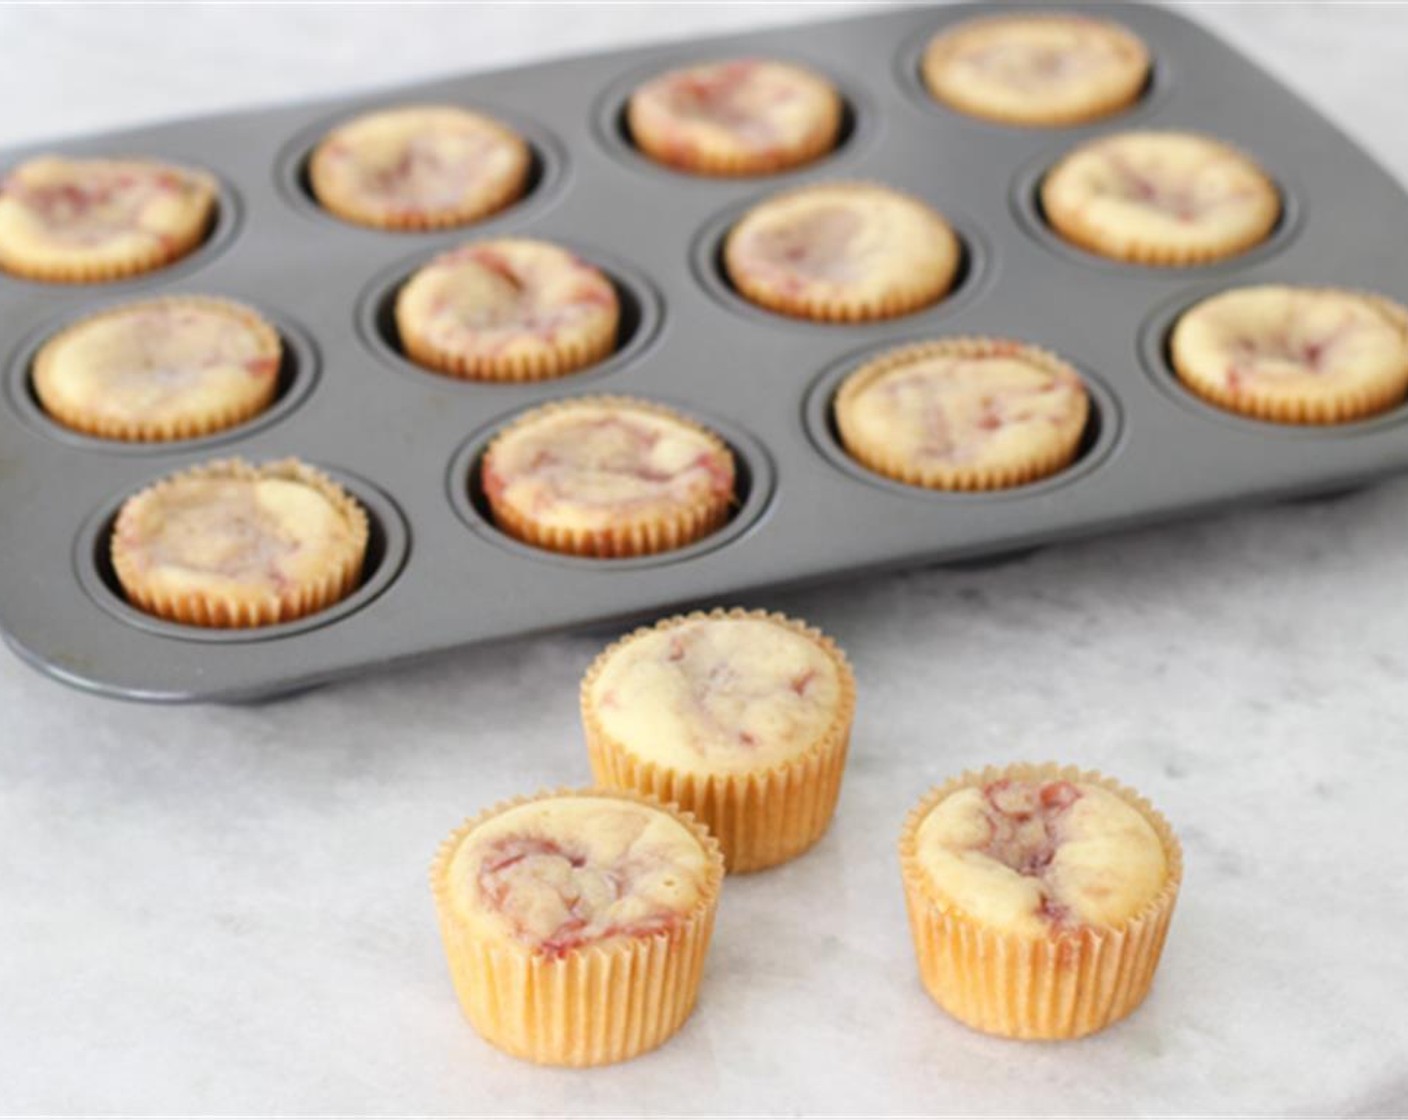 step 6 Bake the cupcakes in the preheated oven for 18-20 minutes. Cool completely on cooling racks.